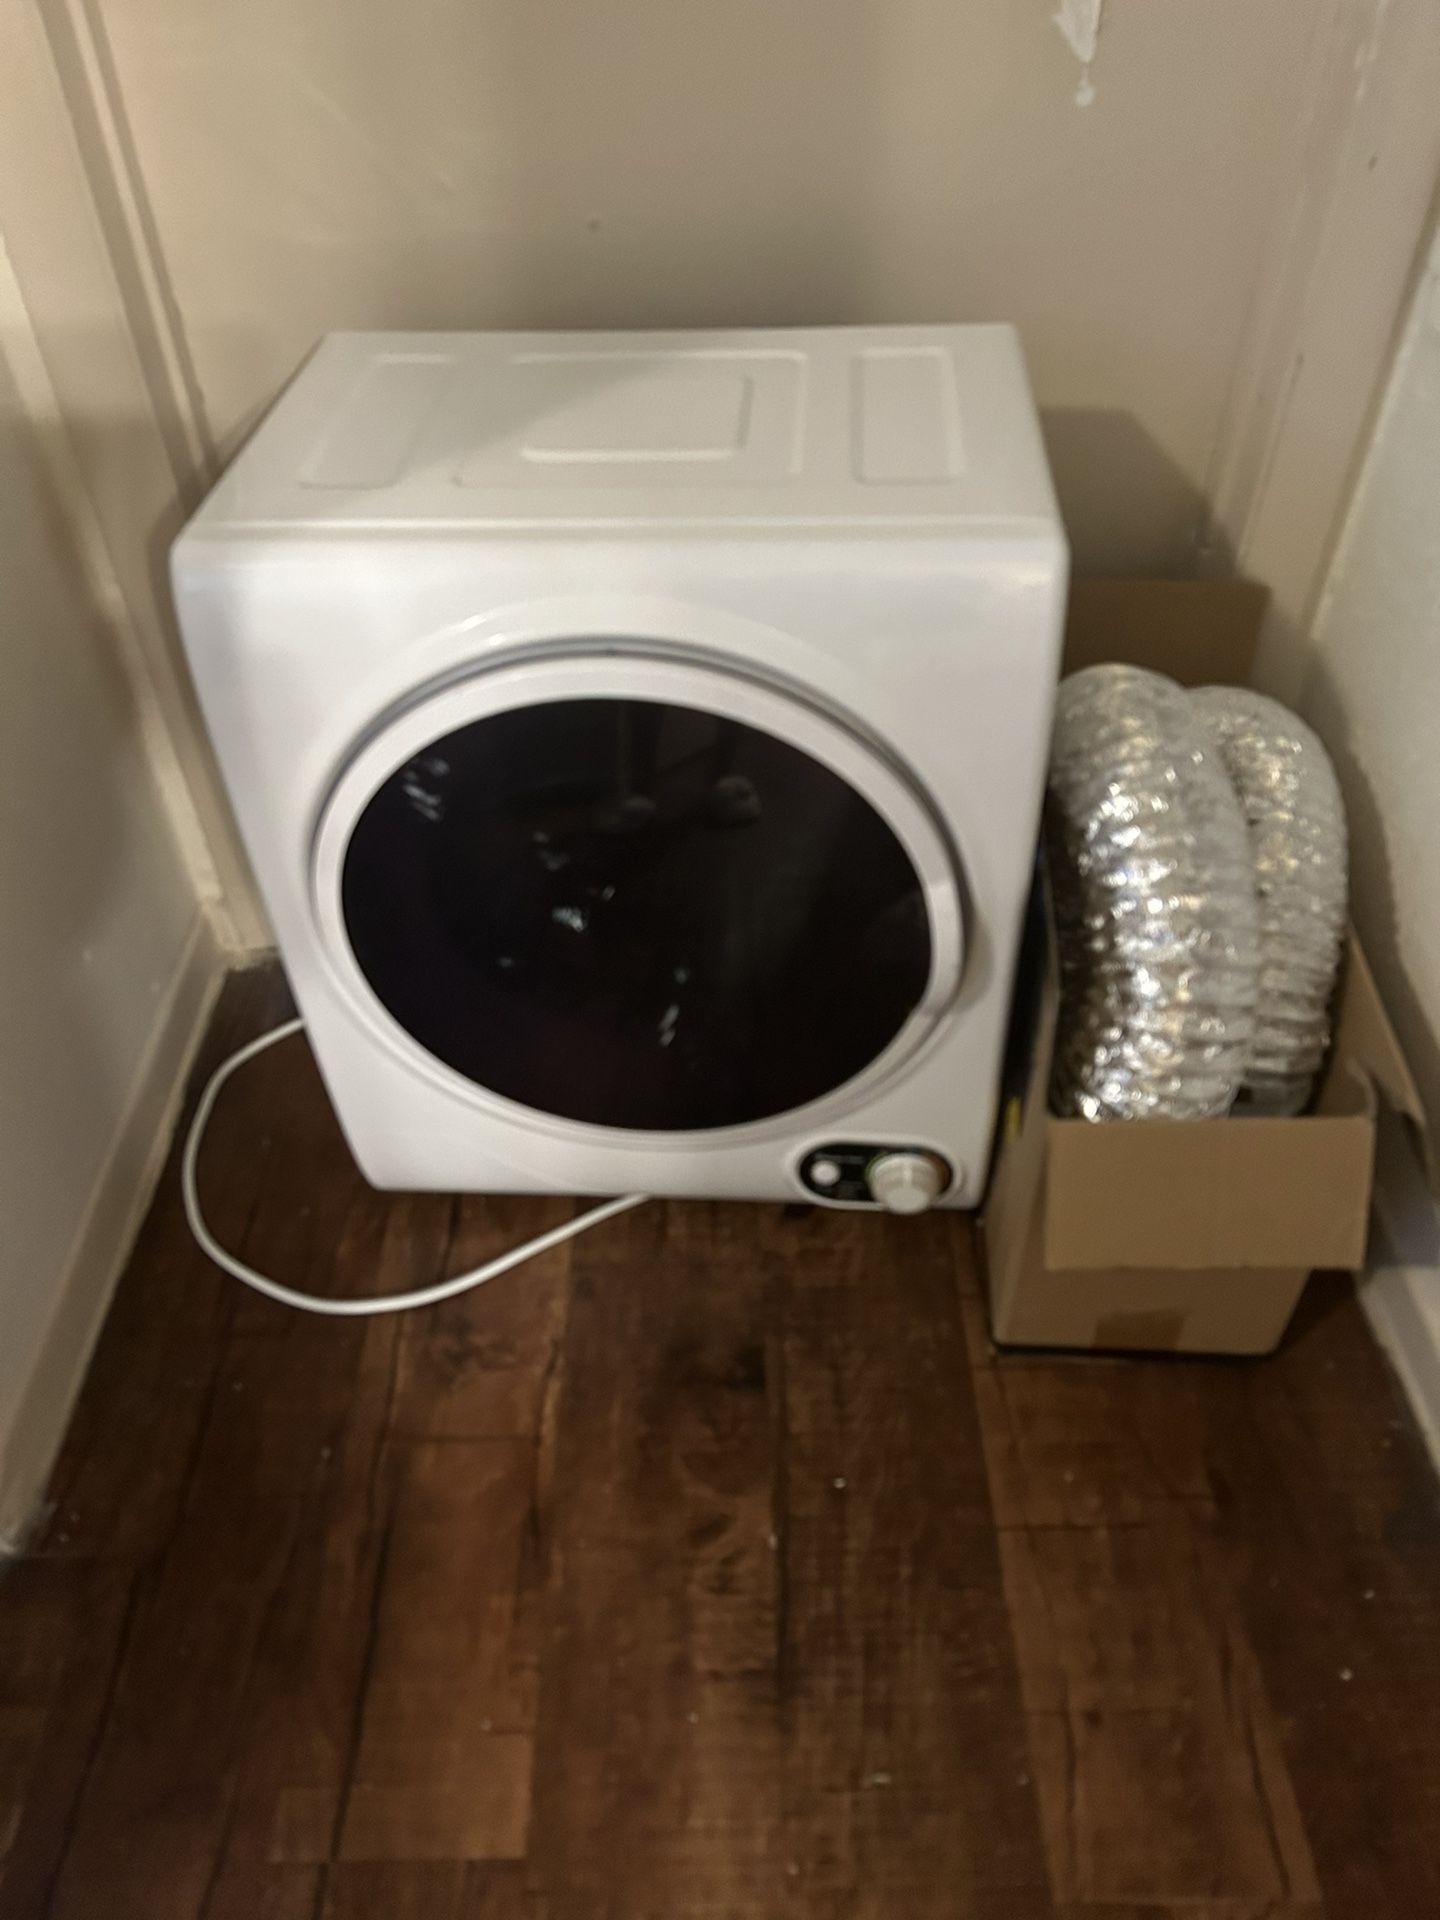 Magic Chef Compact 1.5 cu. ft. Electric Dryer in White